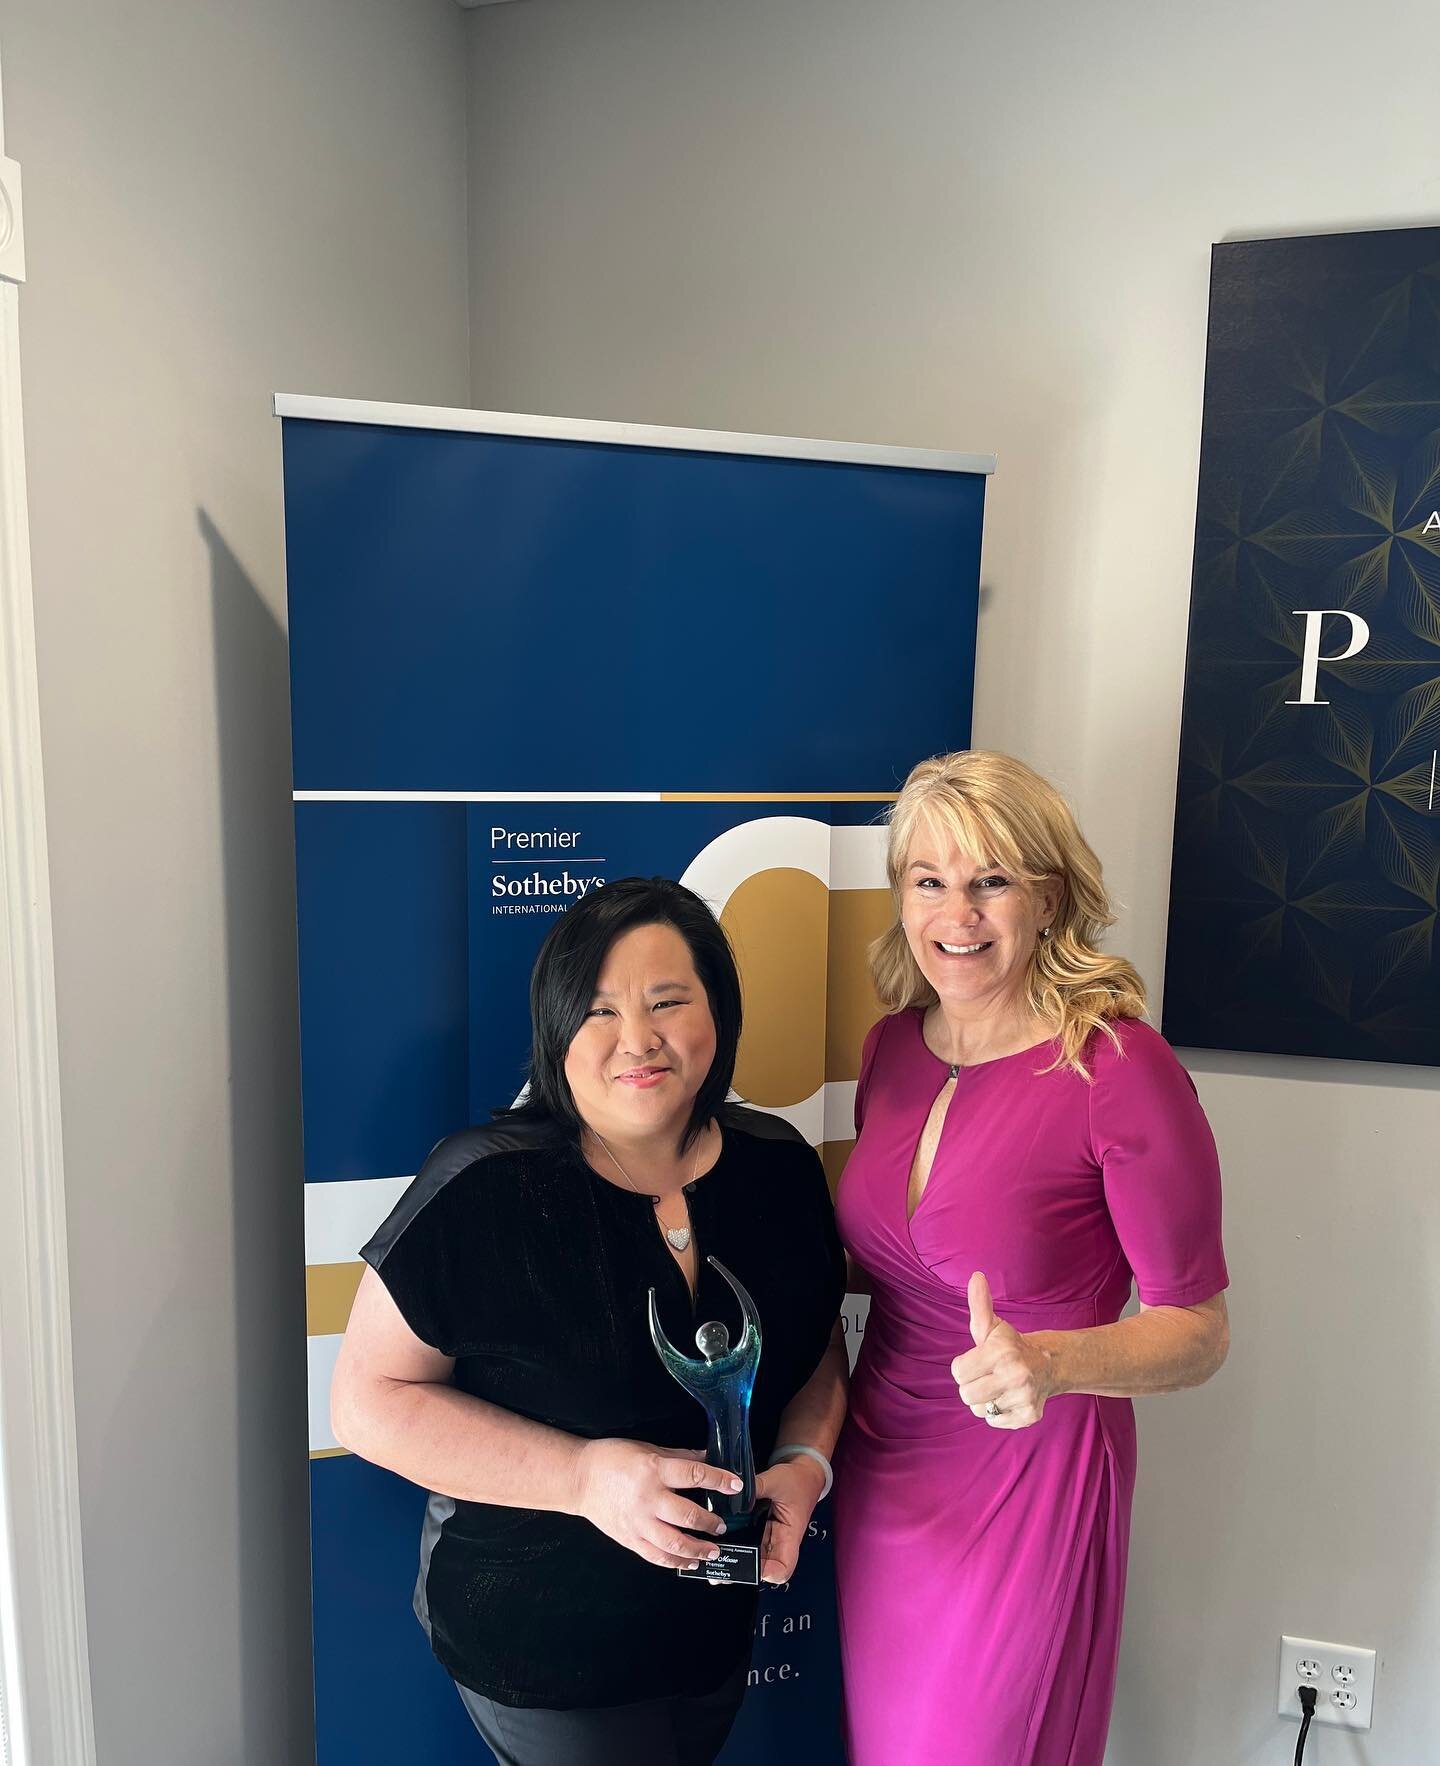 I really could not do it without my office support!
Very grateful for my Brokerage Manager Kathleen and the team! Excited to bring on some new listings and welcome our buyer home!

Honored to be the Top Producing Agent in the office with 89 Transacti